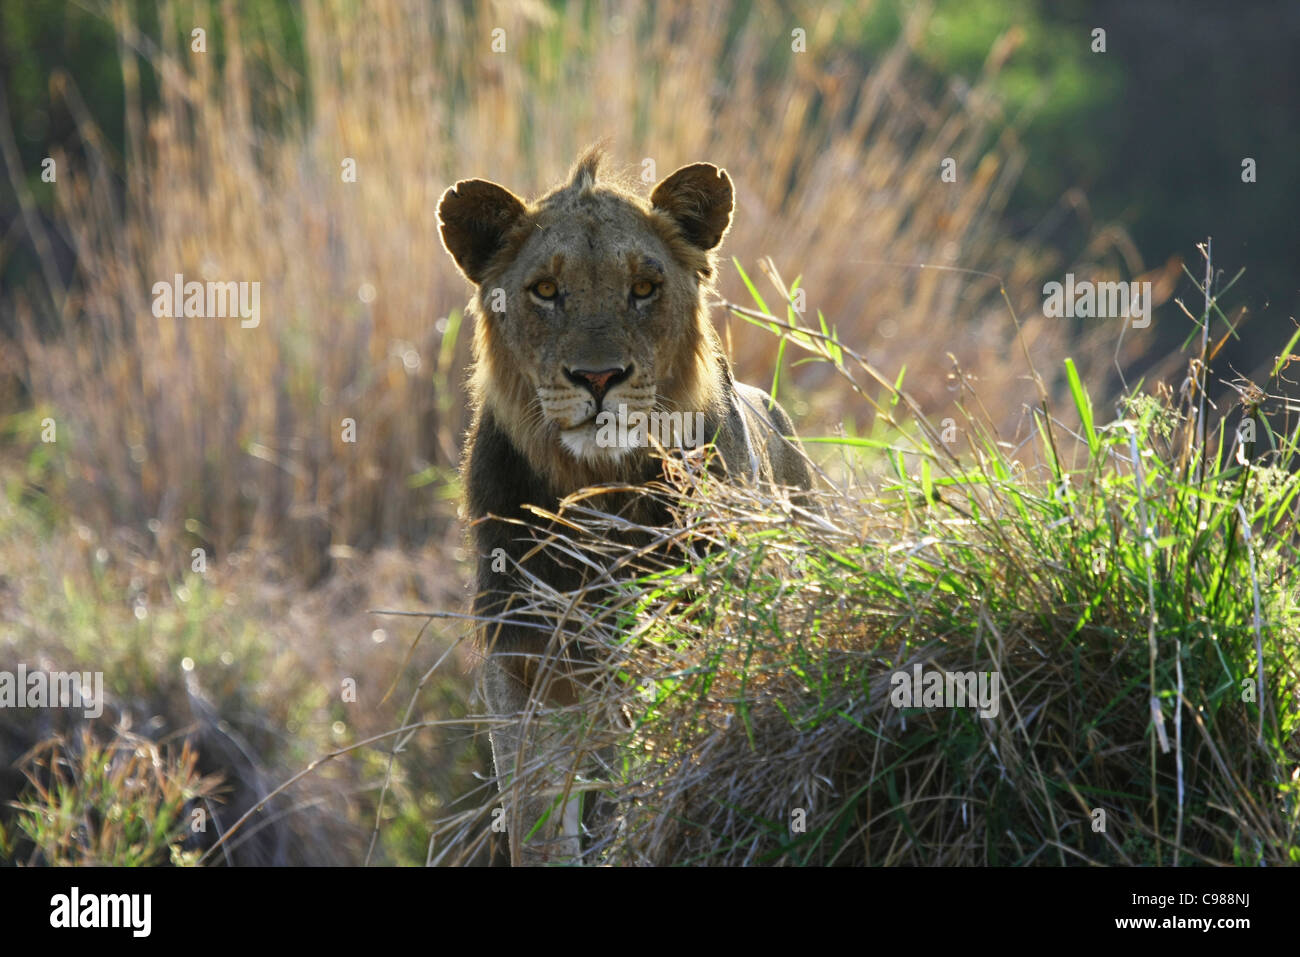 Frontal view of a male lion standing behind a clump of grass Stock Photo